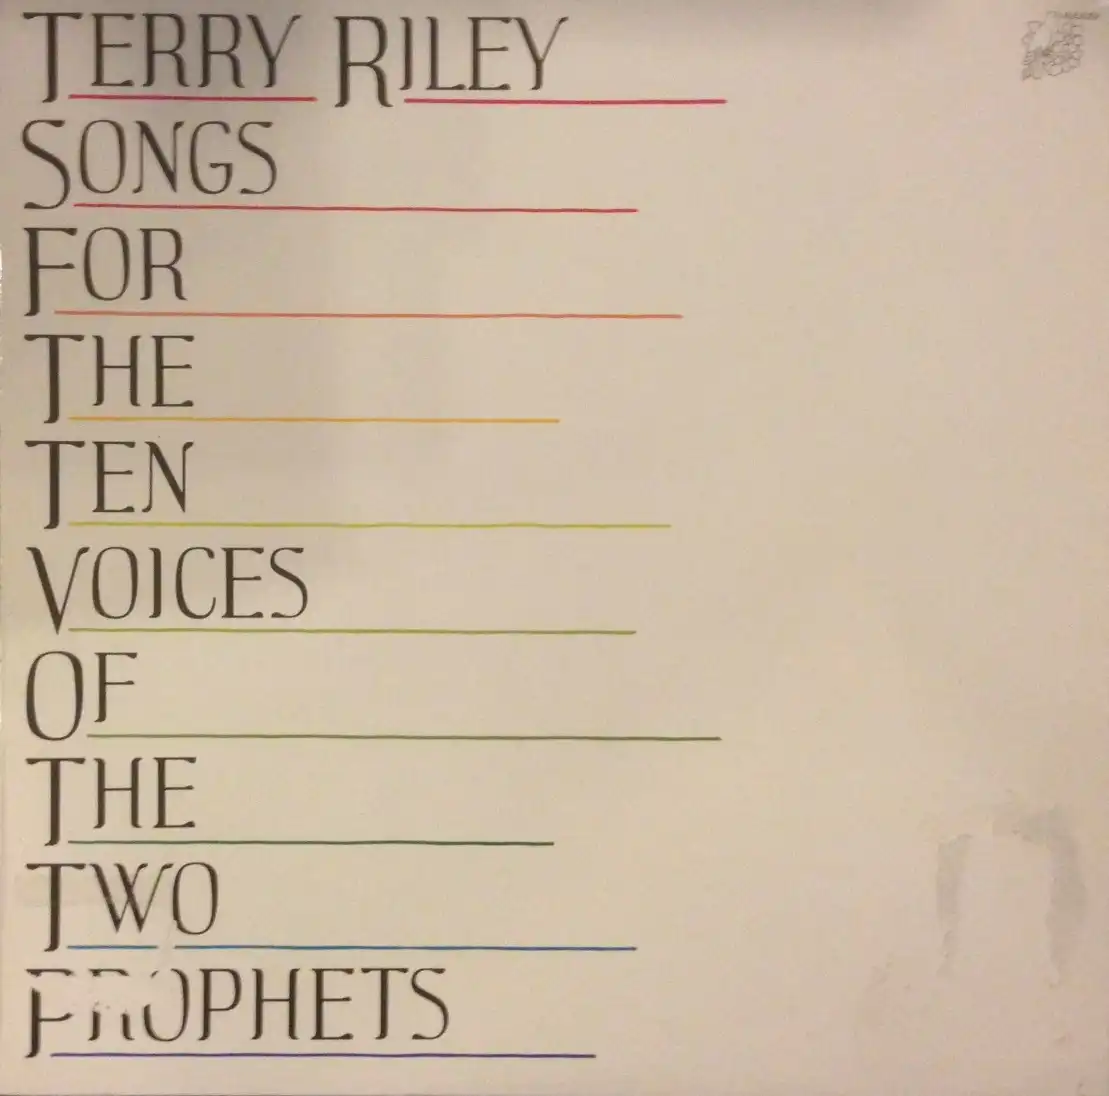 TERRY RILEY / SONGS FOR THE TEN VOICES OF THE TWO PROPHETSΥʥ쥳ɥ㥱å ()